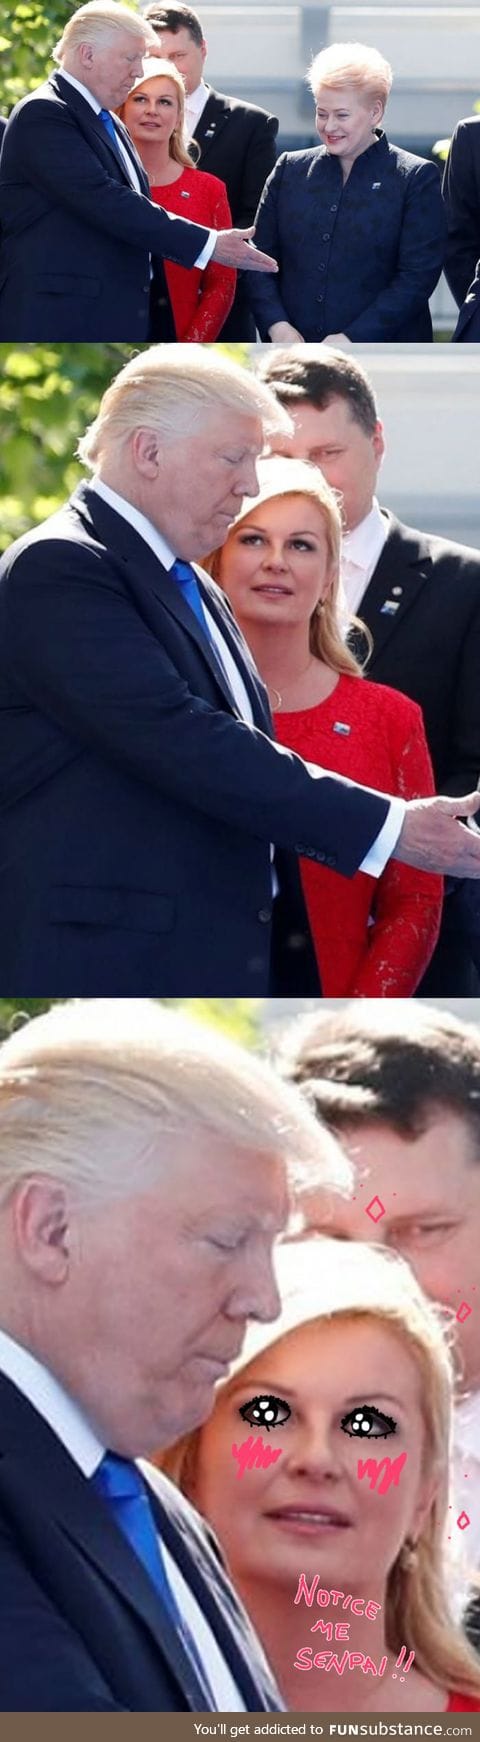 Life goals: Have someone that looks at you like Croatian president looks at Trump